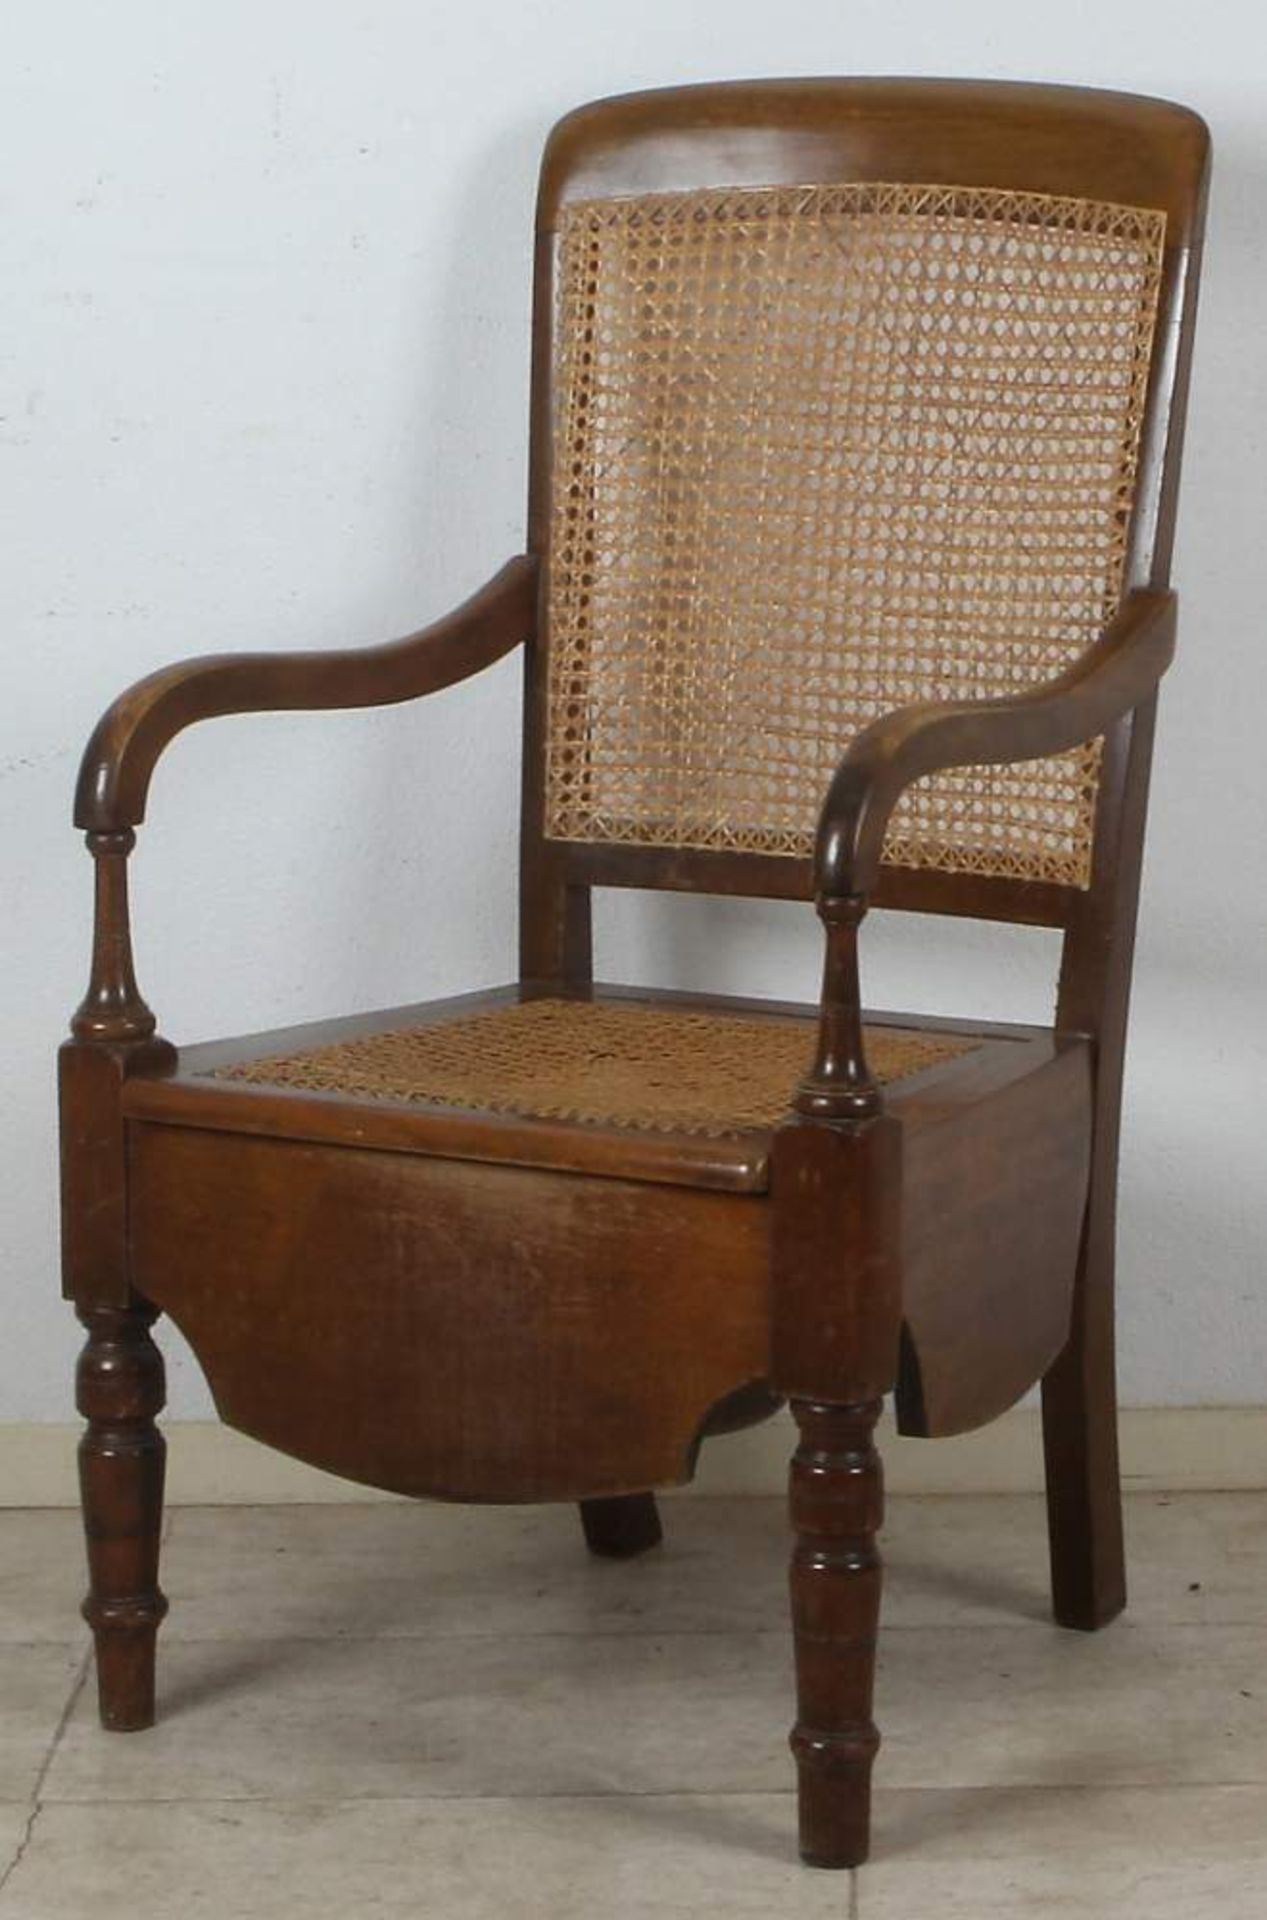 Nineteenth century mahogany kakstoel with woven seat and back, in good condition 100x53x55cm